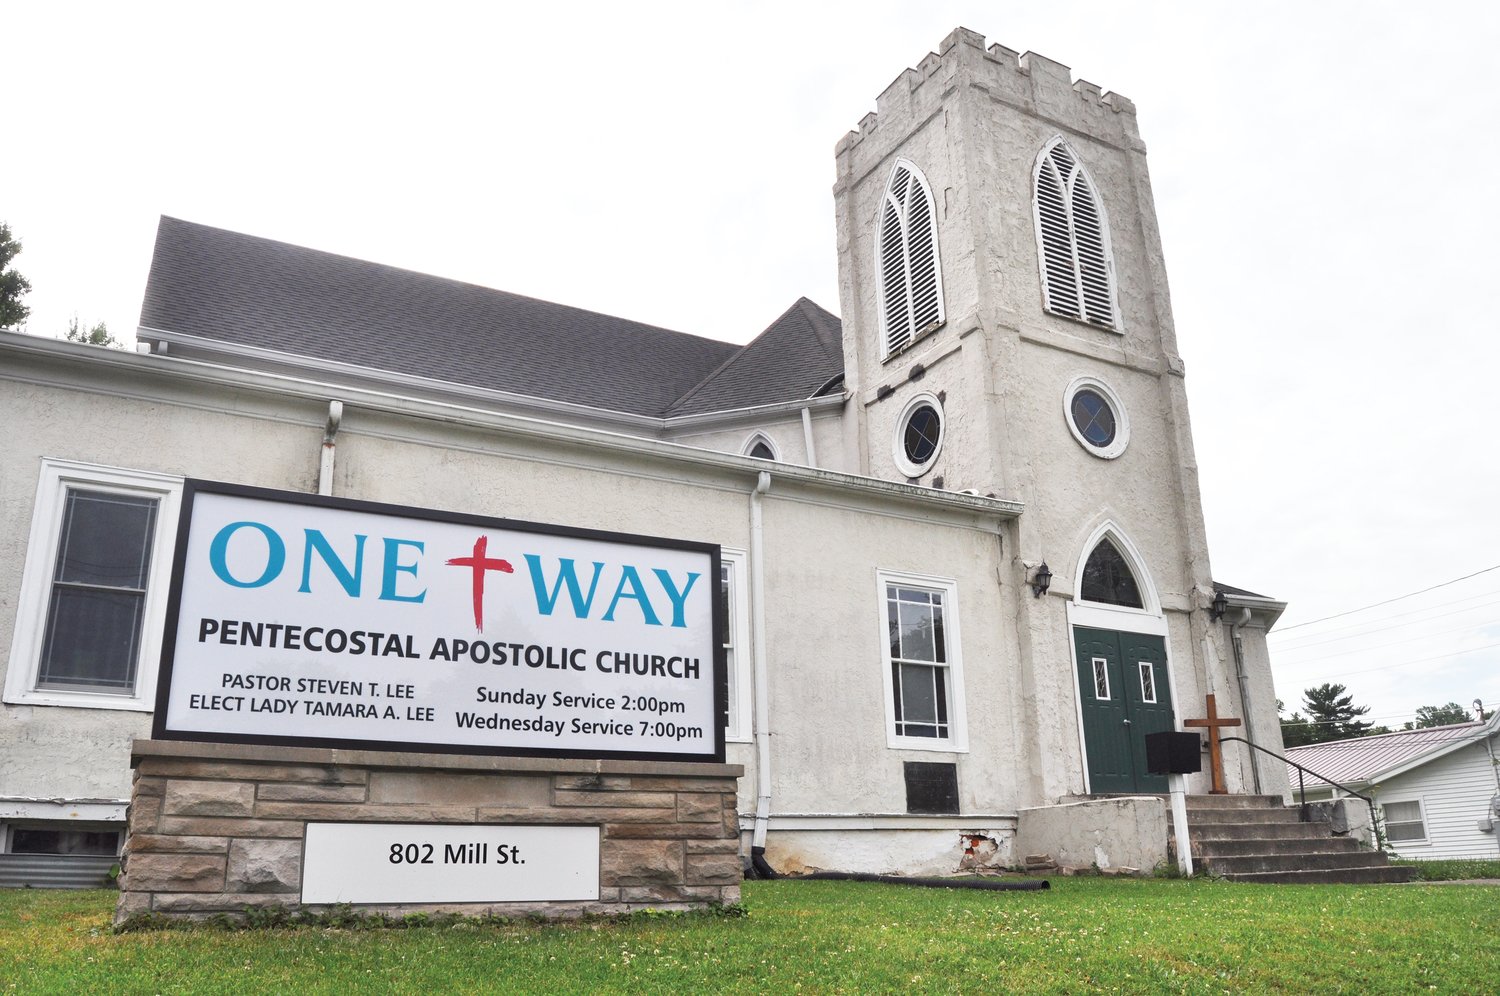 One Way Pentecostal Apostolic Church moved in to the former Milligan Memorial Presbyterian Church building on Mill Street earlier this year. The congregation first began meeting in the public library in the 1980s.